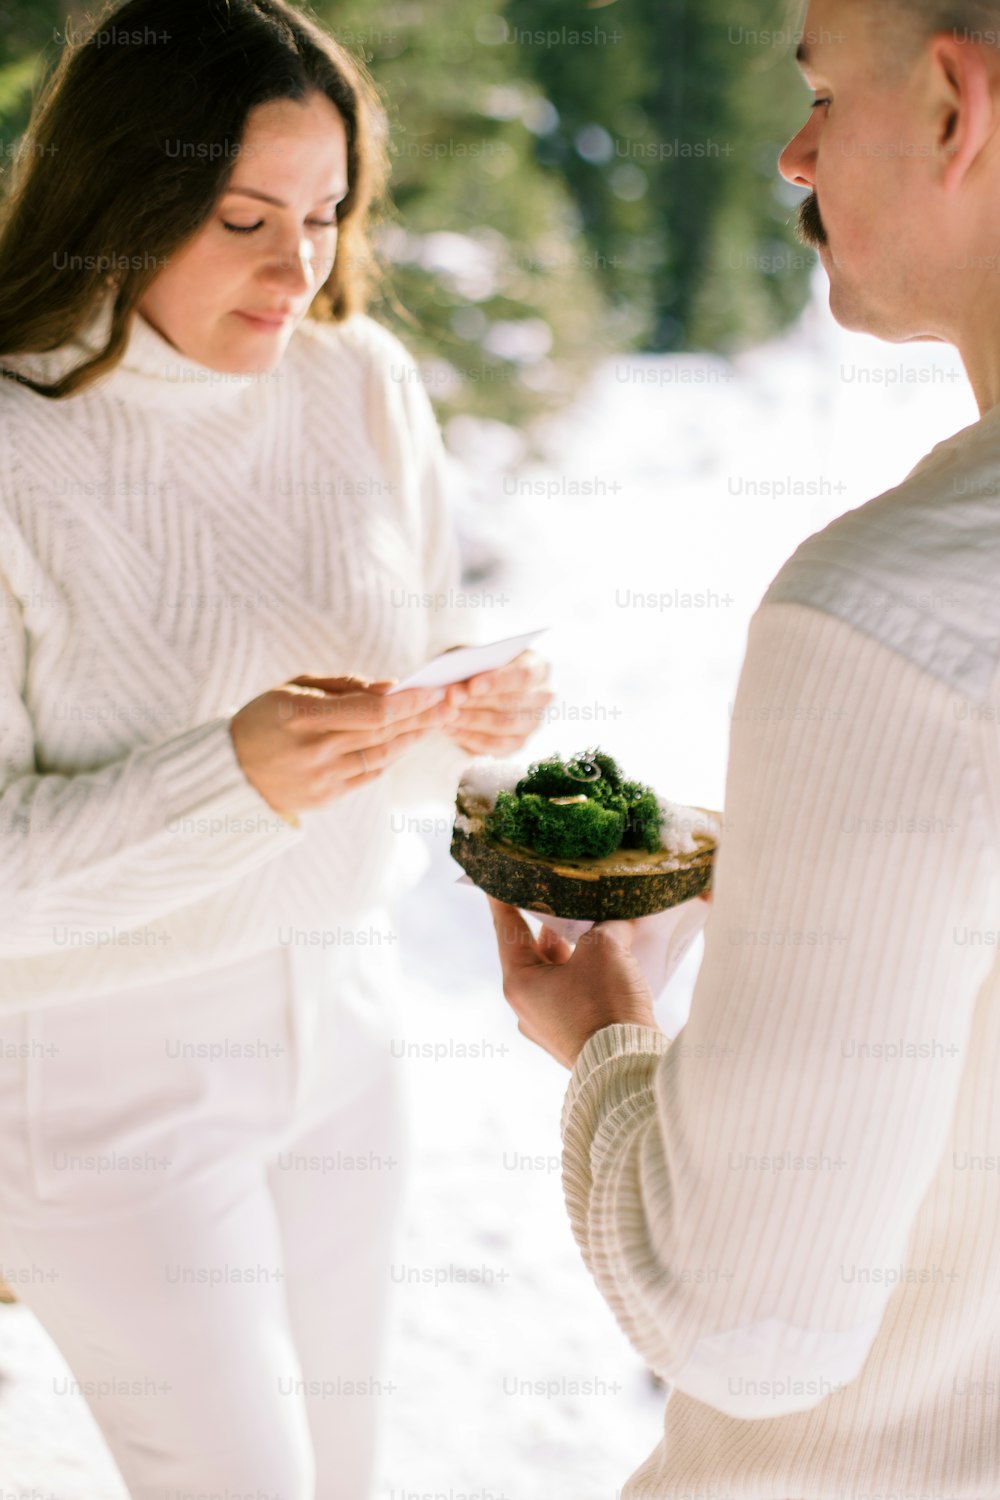 a man holding a plate of food next to a woman